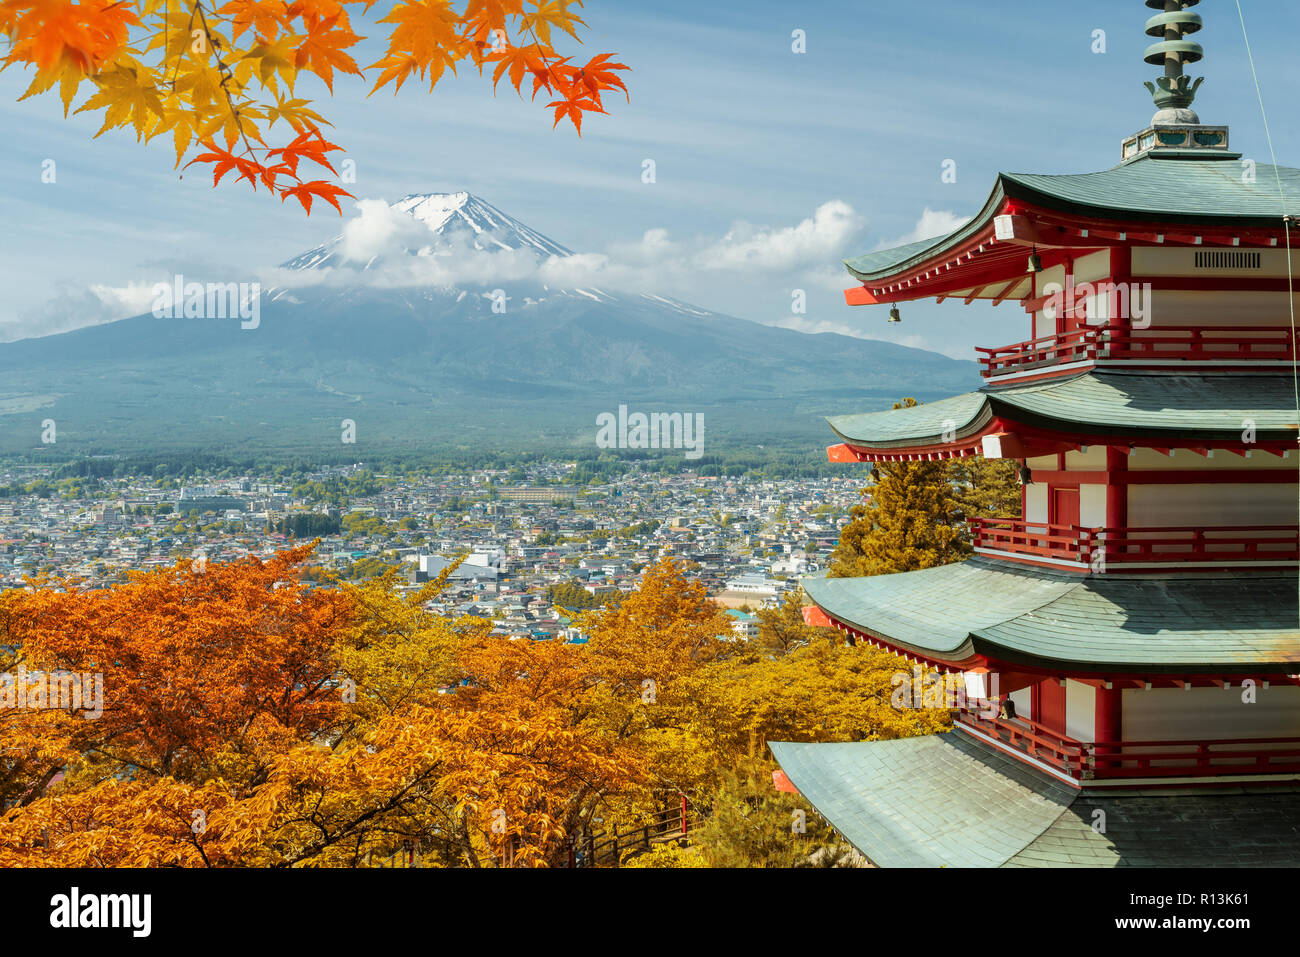 Mt. Fuji und rote Pagode mit Herbst Farben in Japan, Japan Herbstsaison. Stockfoto